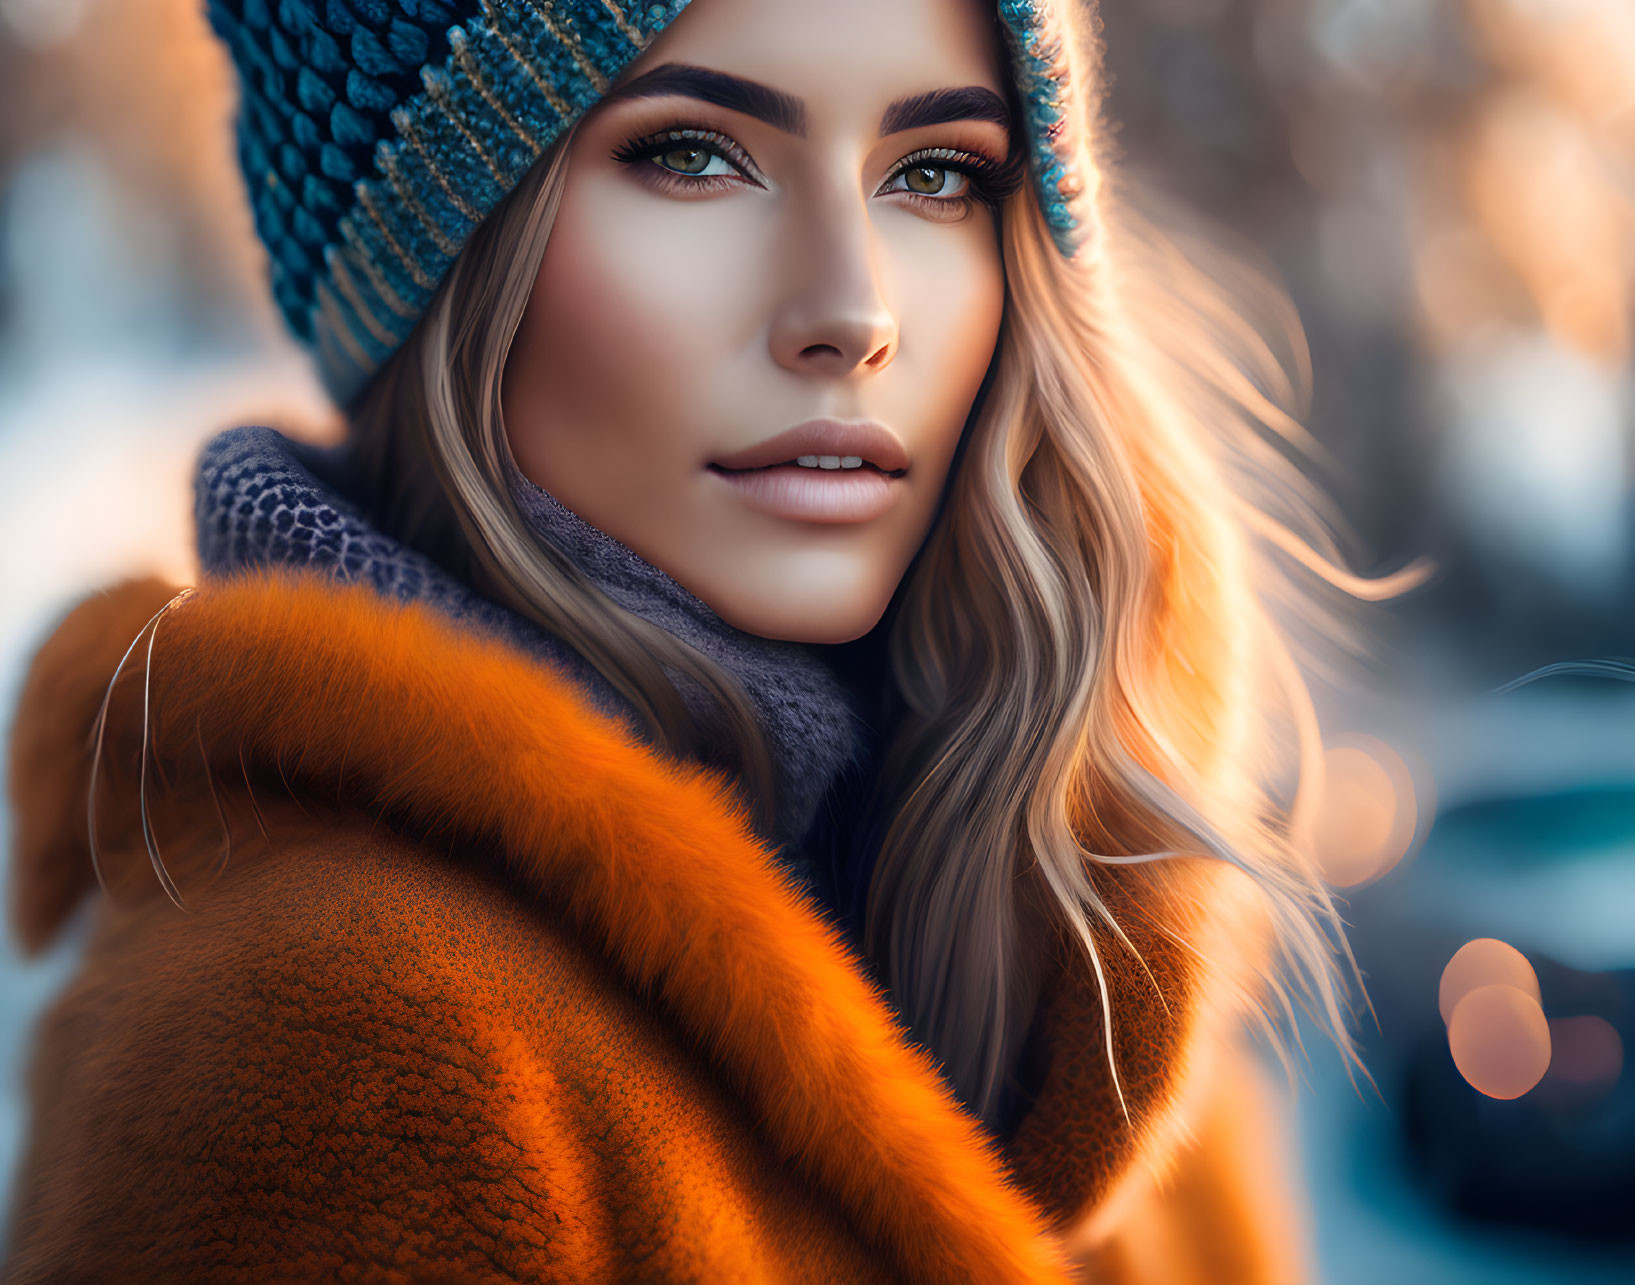 Woman in Orange Fur Coat with Striking Eyes and Hat Portrait